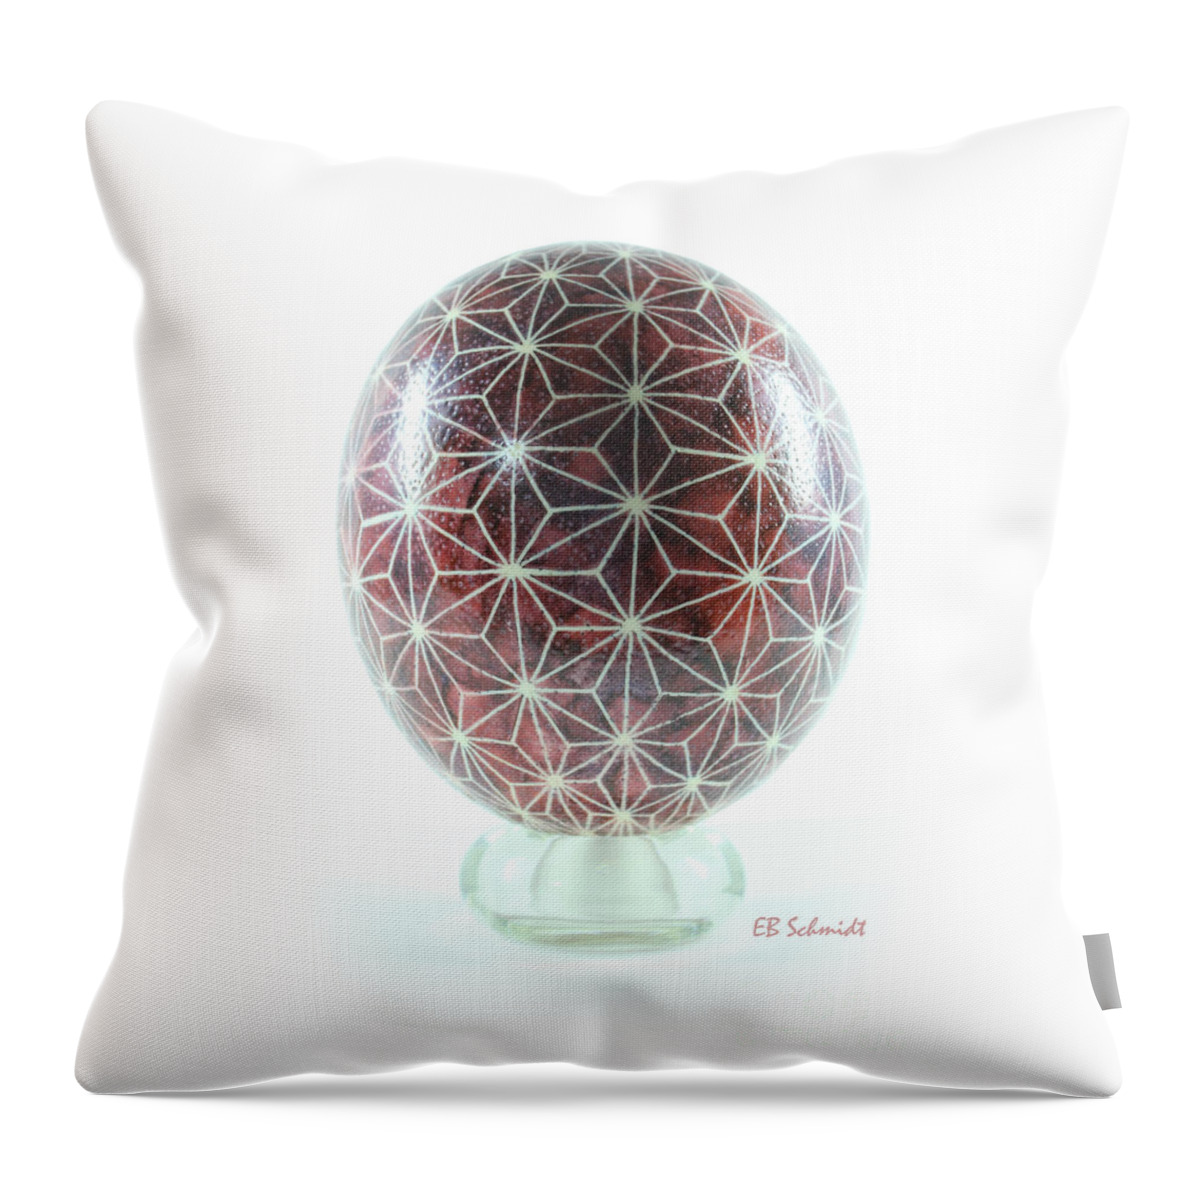 Chinese Star Throw Pillow featuring the photograph Ostrich Egg OD001 by E B Schmidt